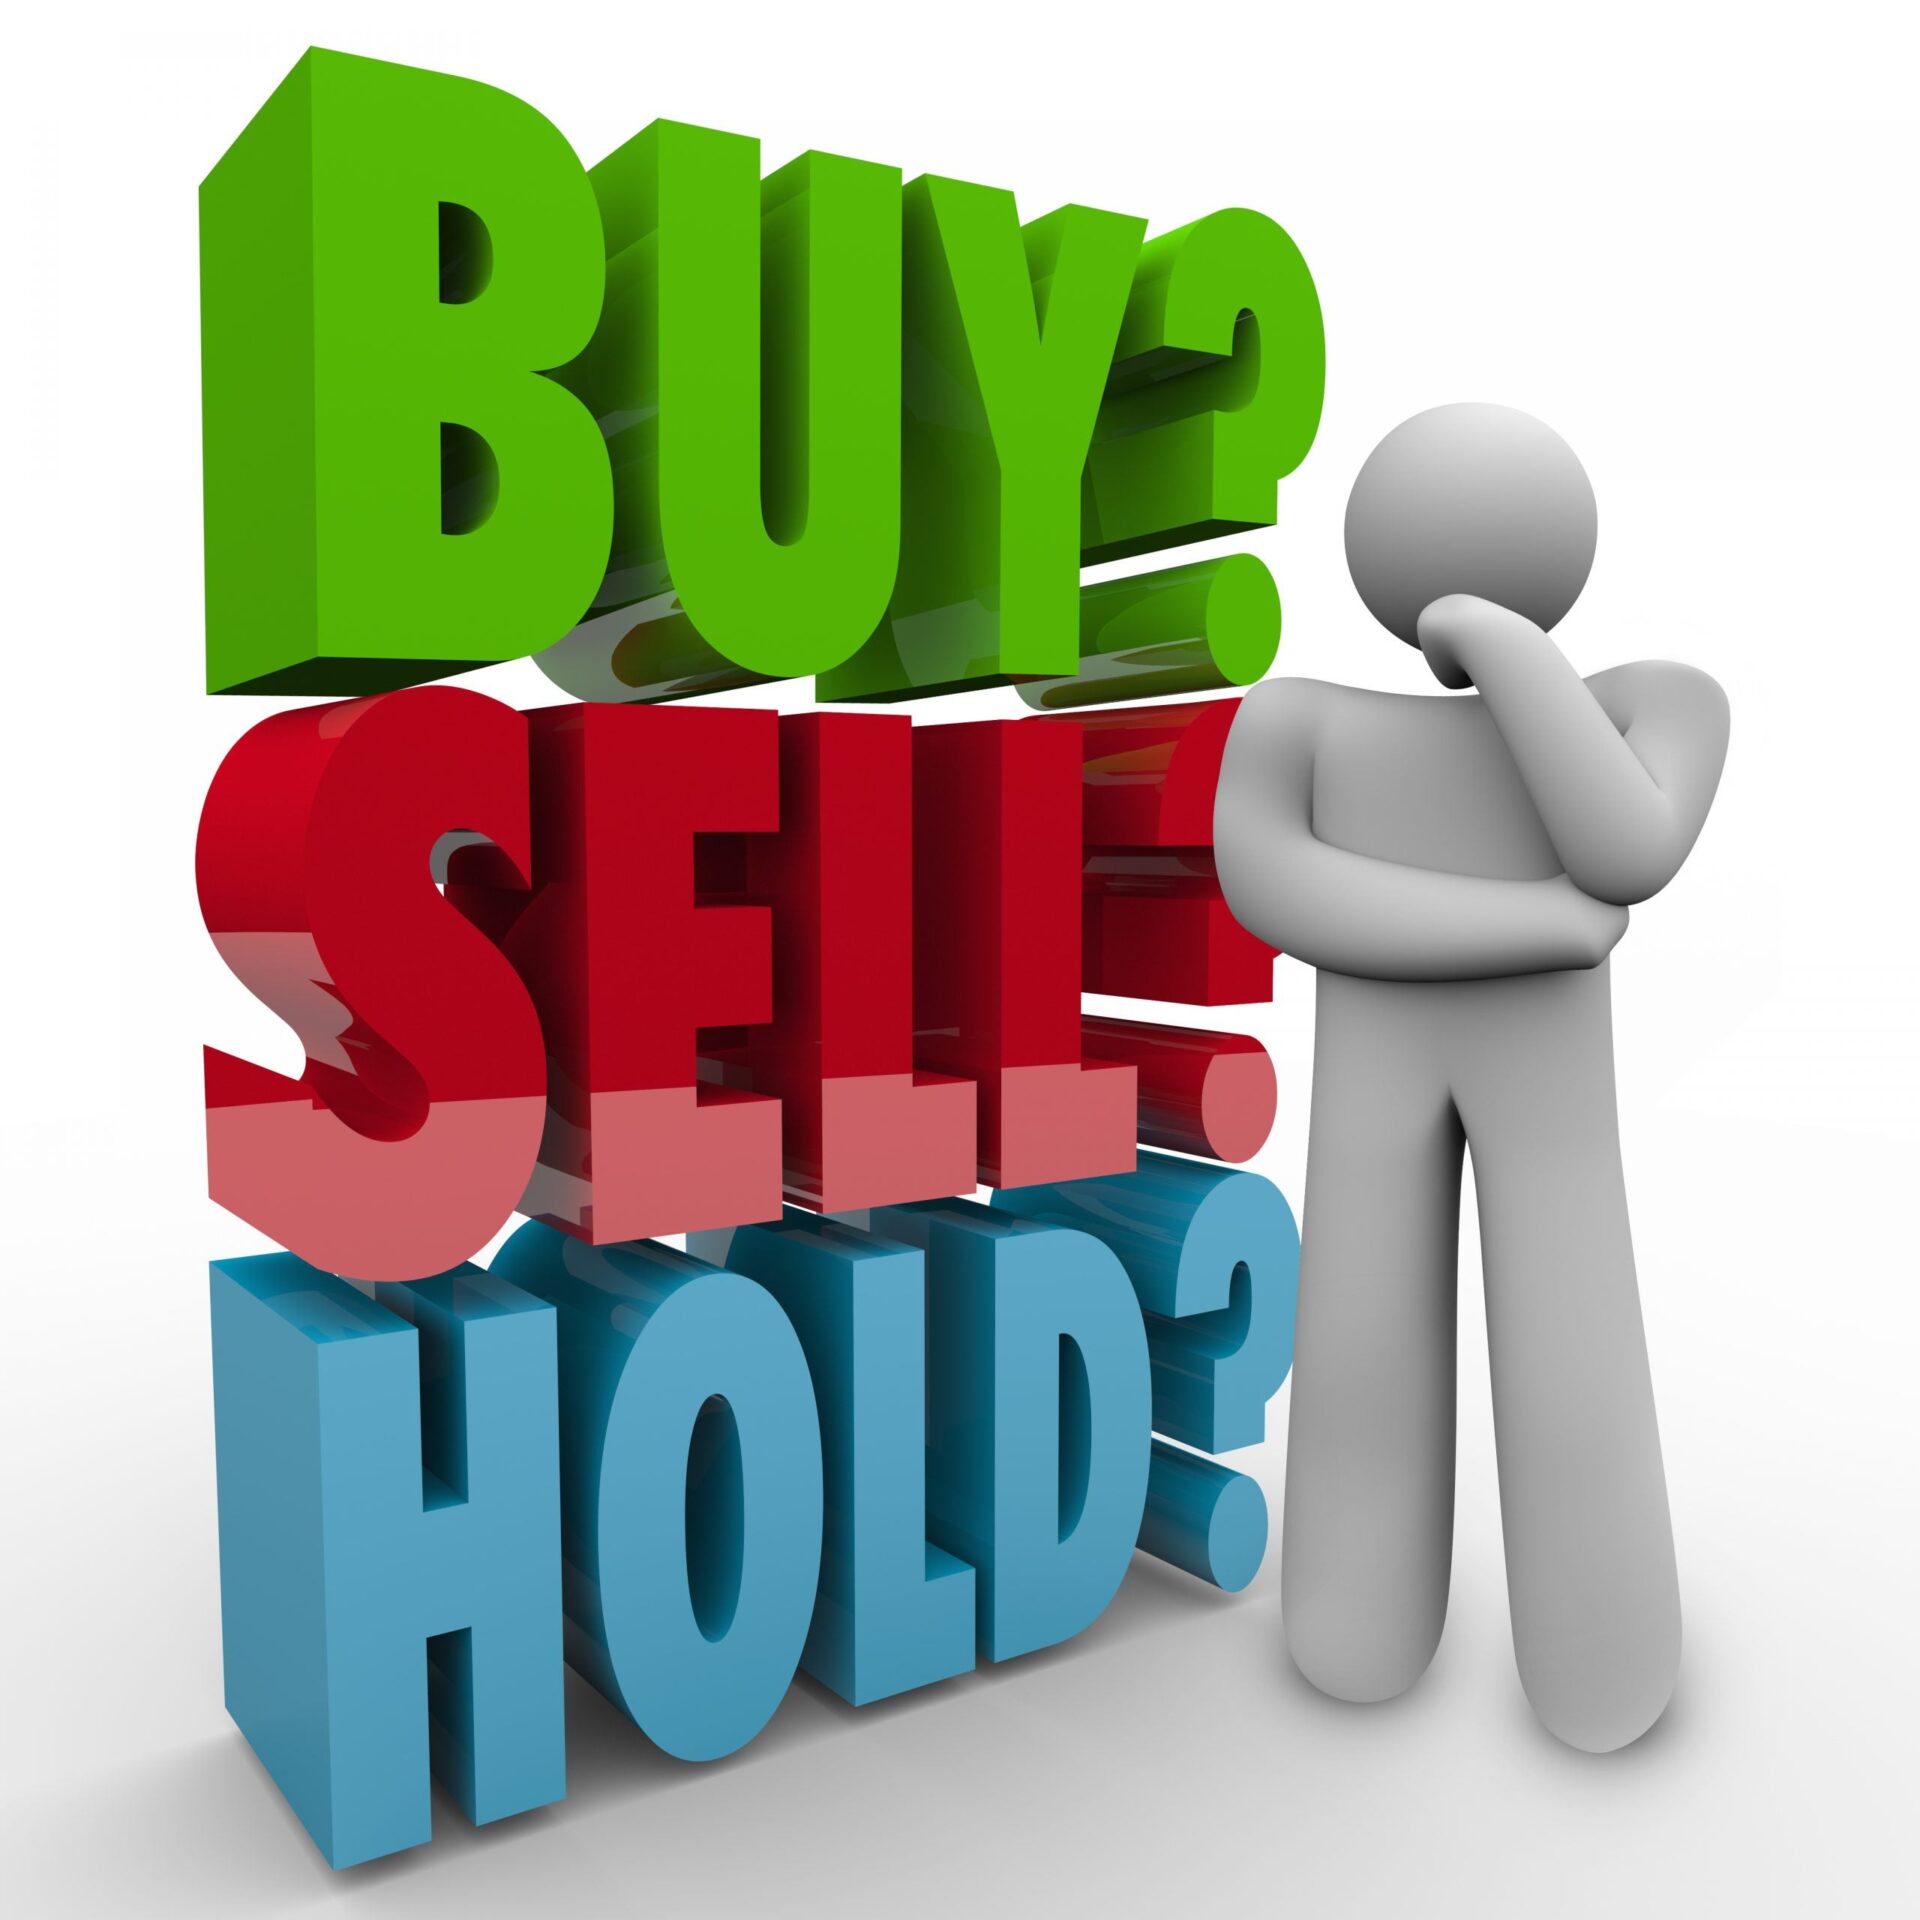 How To Know When to Buy, Sell, Or Hold a Stock?